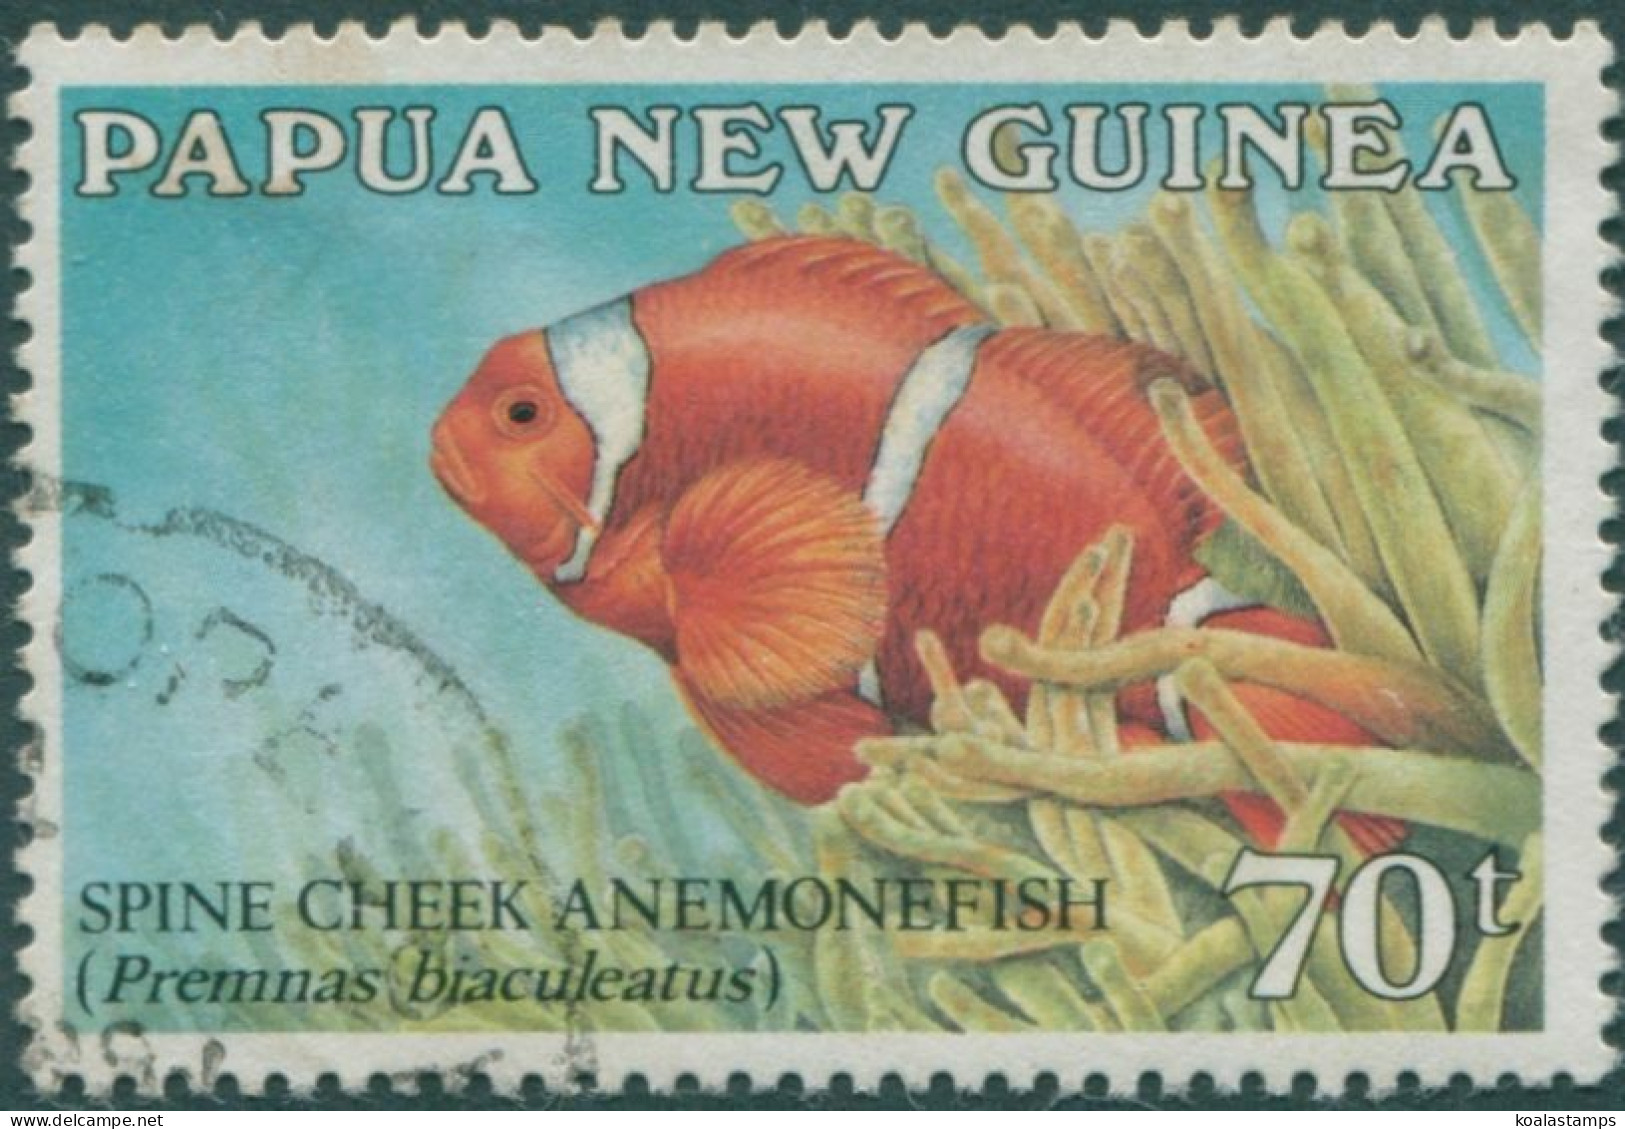 Papua New Guinea 1987 SG542 70t Spine Cheek Anemonefish FU - Papouasie-Nouvelle-Guinée